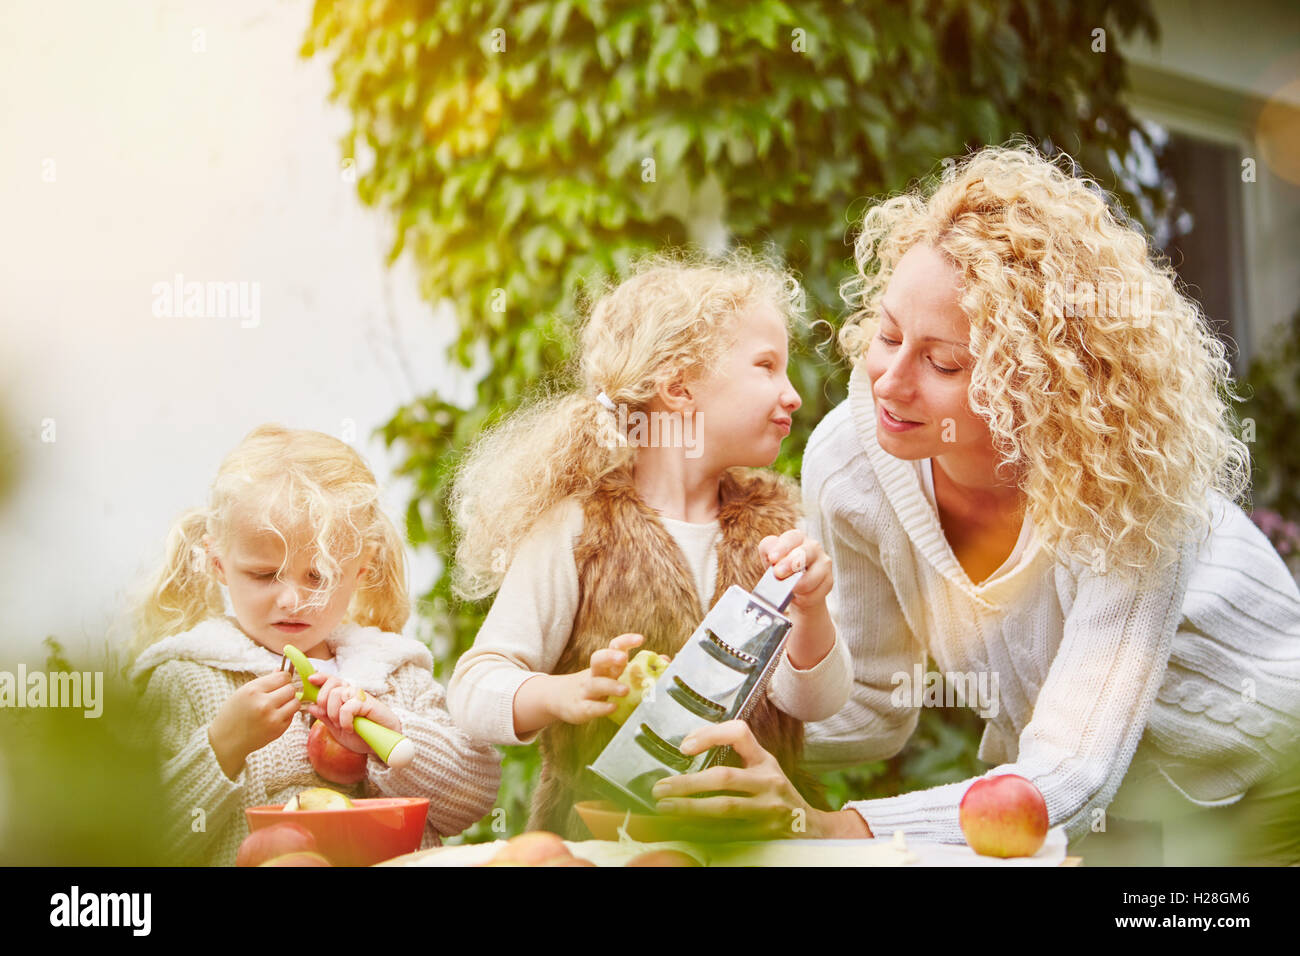 Mother and children rubbing apples for baking Stock Photo